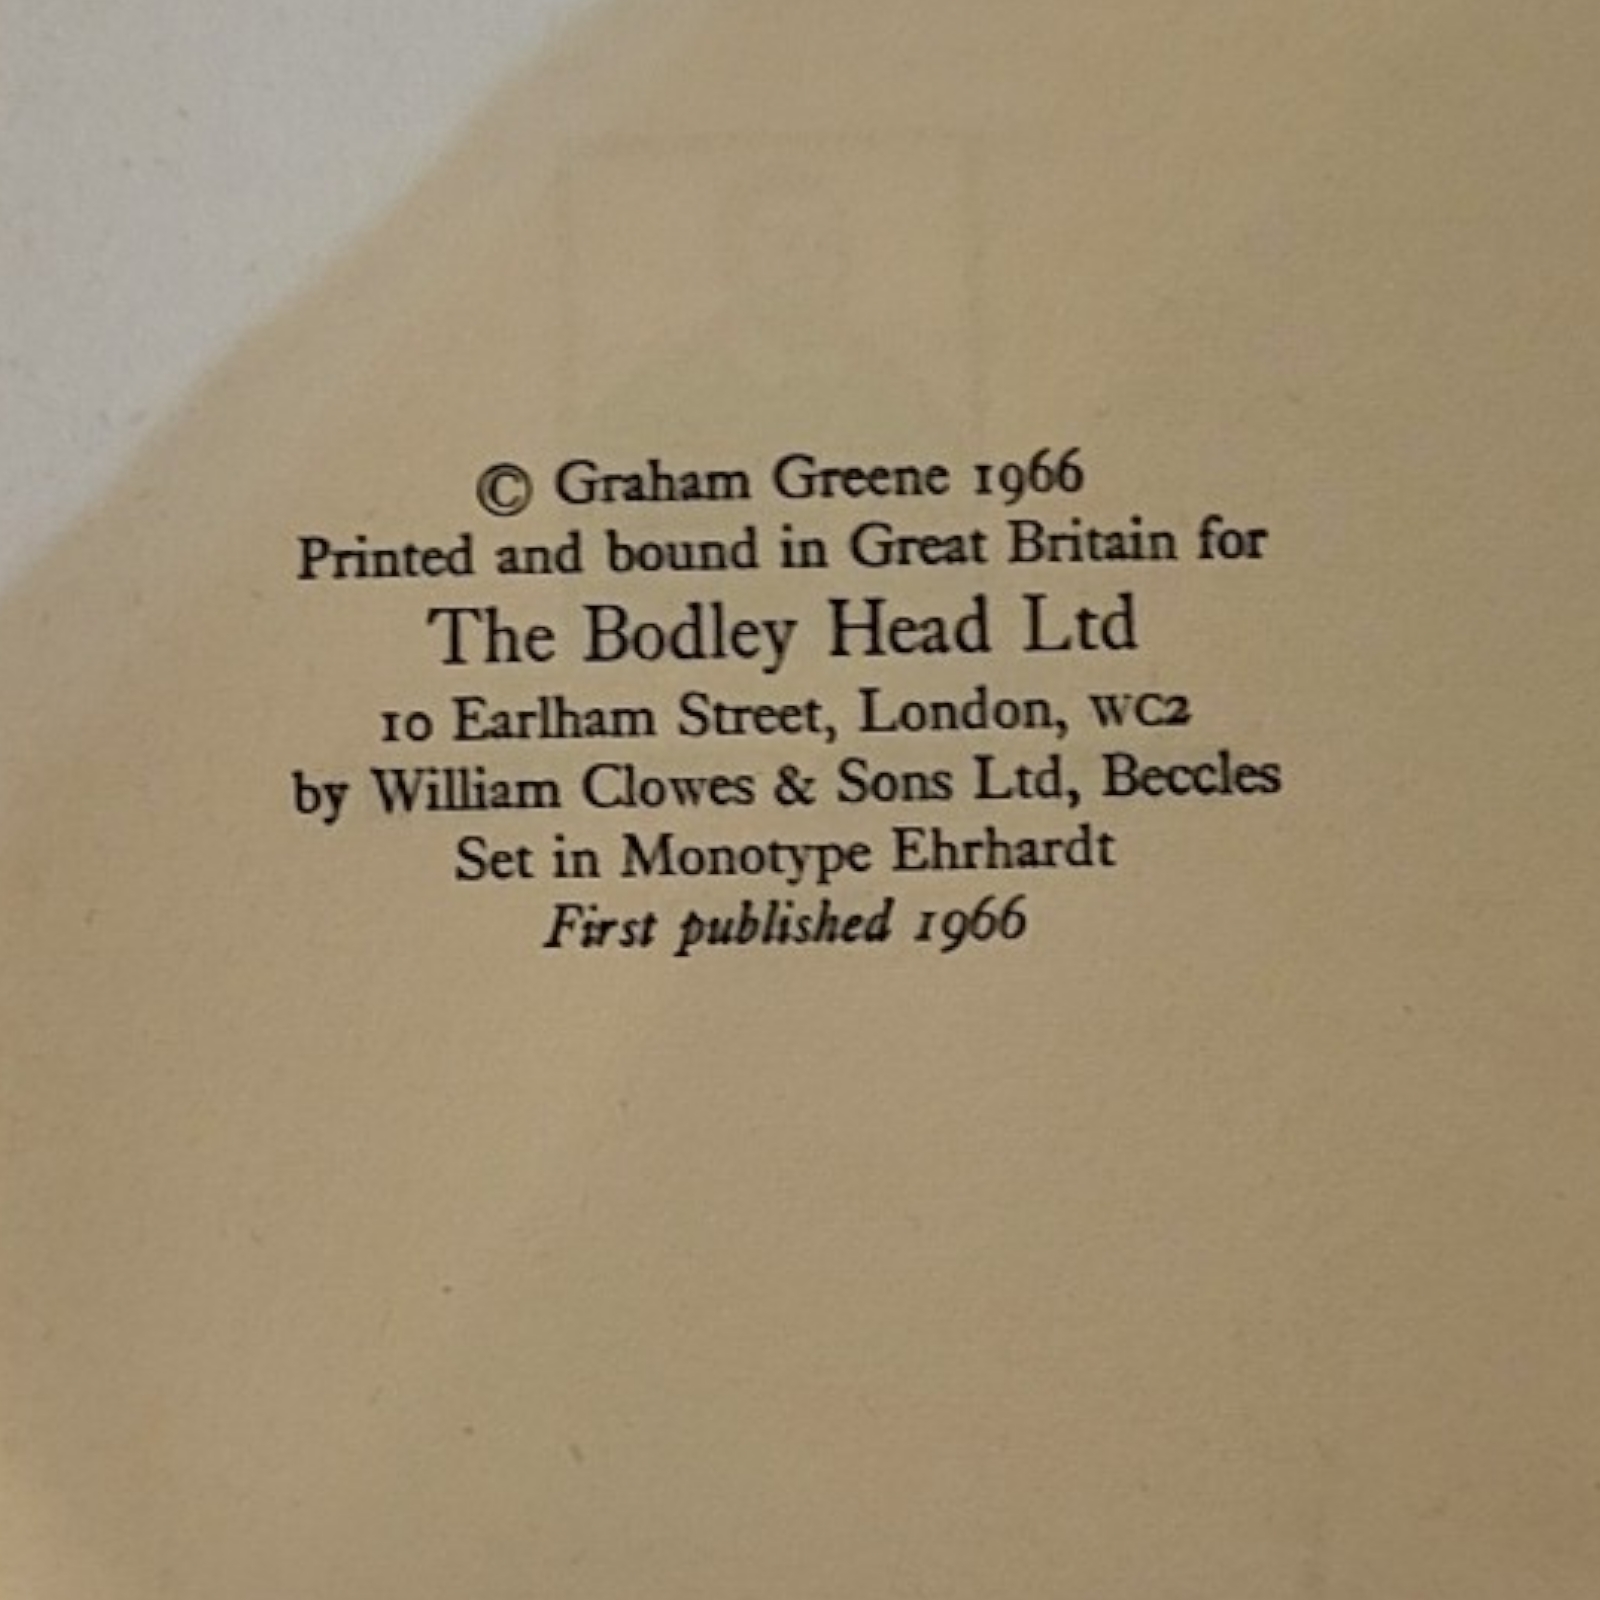 GRAHAM GREENE, THE COMEDIANS, DUST JACKET BY IVAN LAPPER First published for The Bodley Head Ltd, by - Image 9 of 9